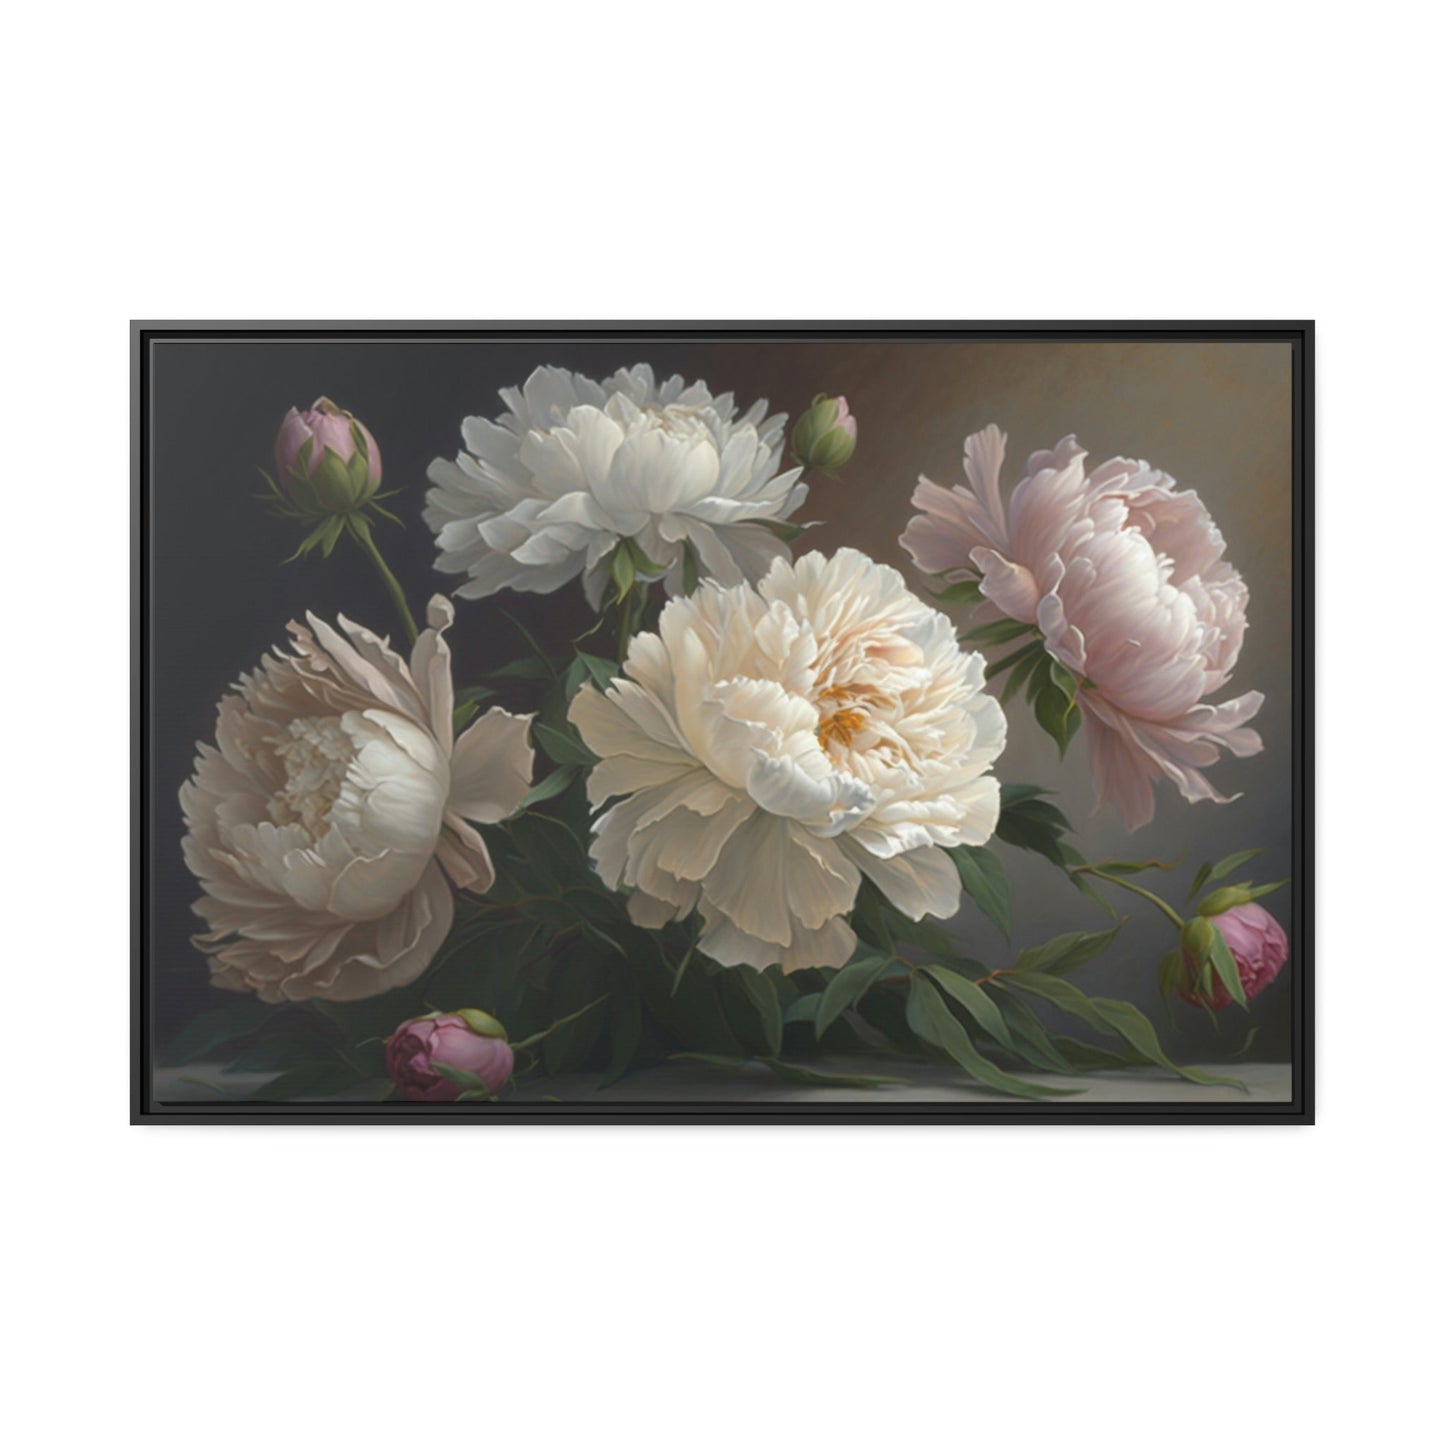 Pink Perfection: Peonies in Bloom